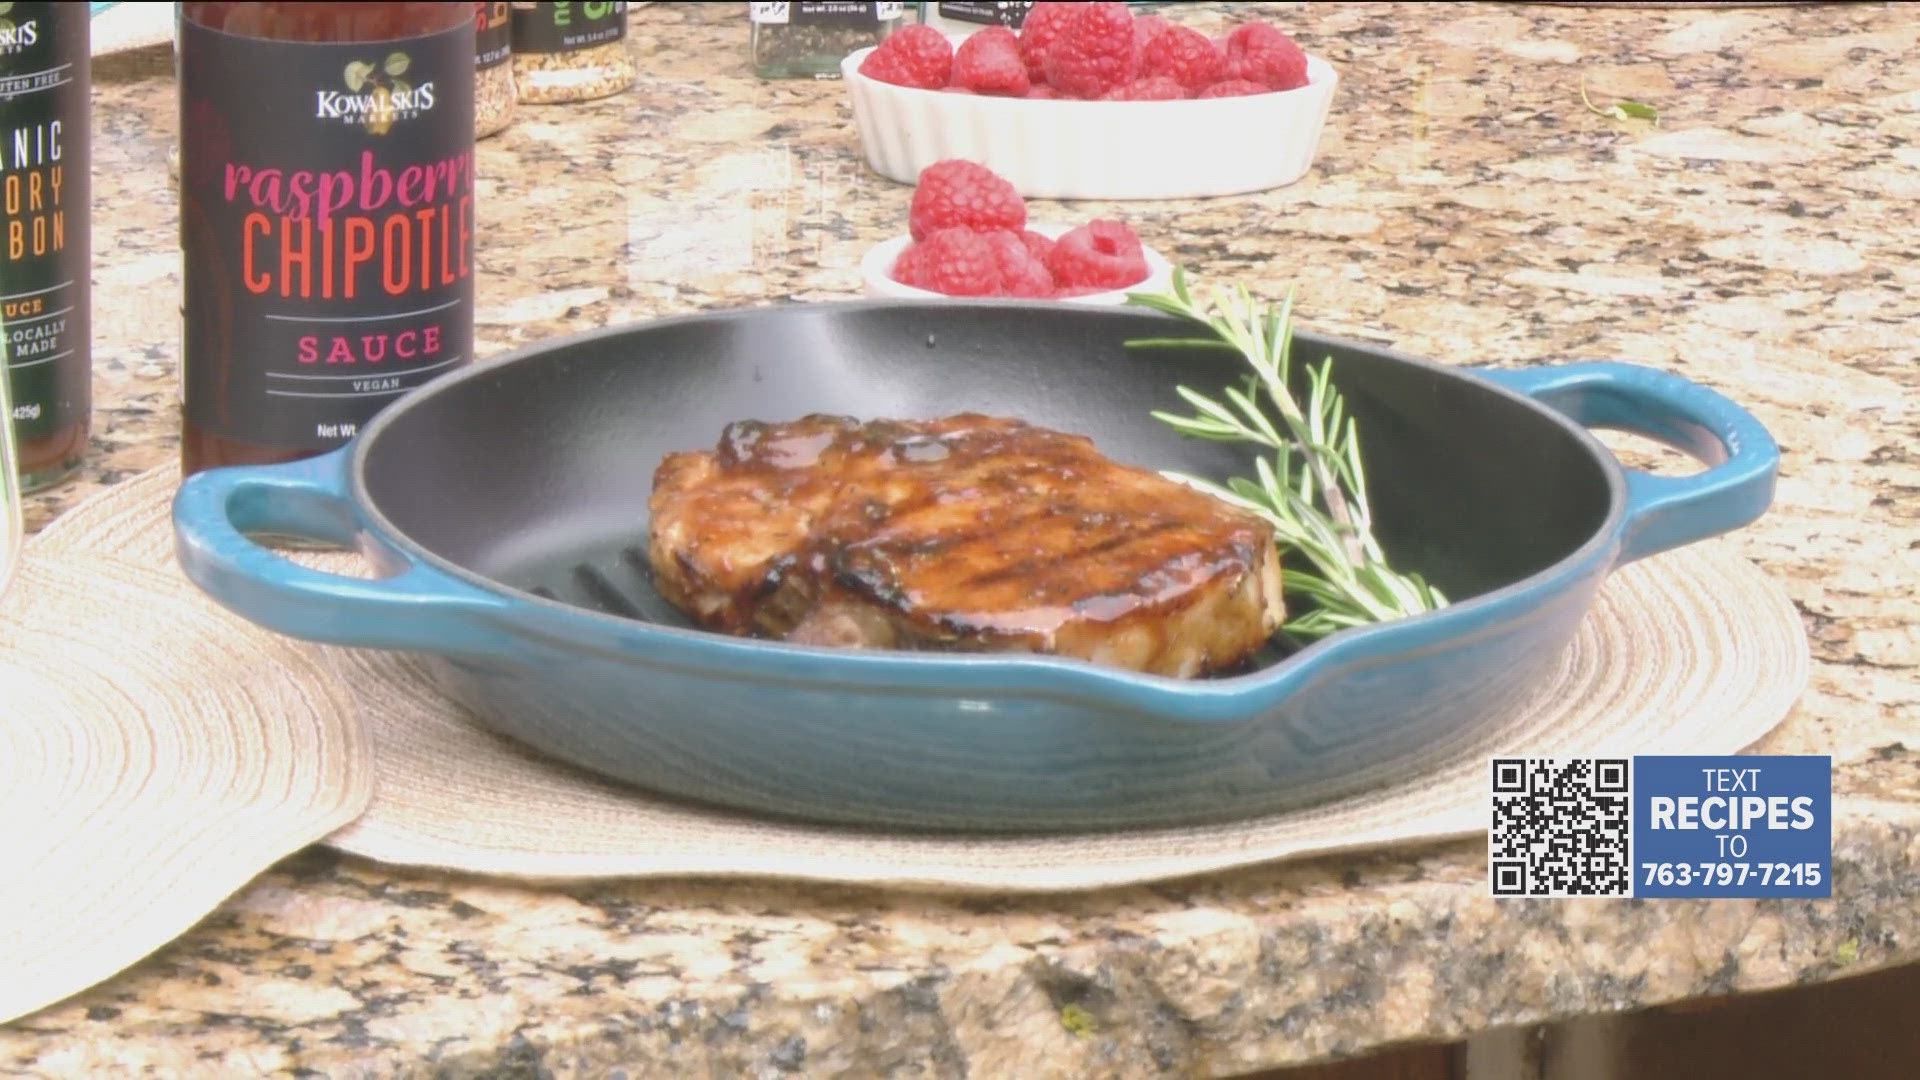 Rachael Perron, Kowalski's culinary director, joined KARE 11 Saturday to share a recipe and tips on grilling.